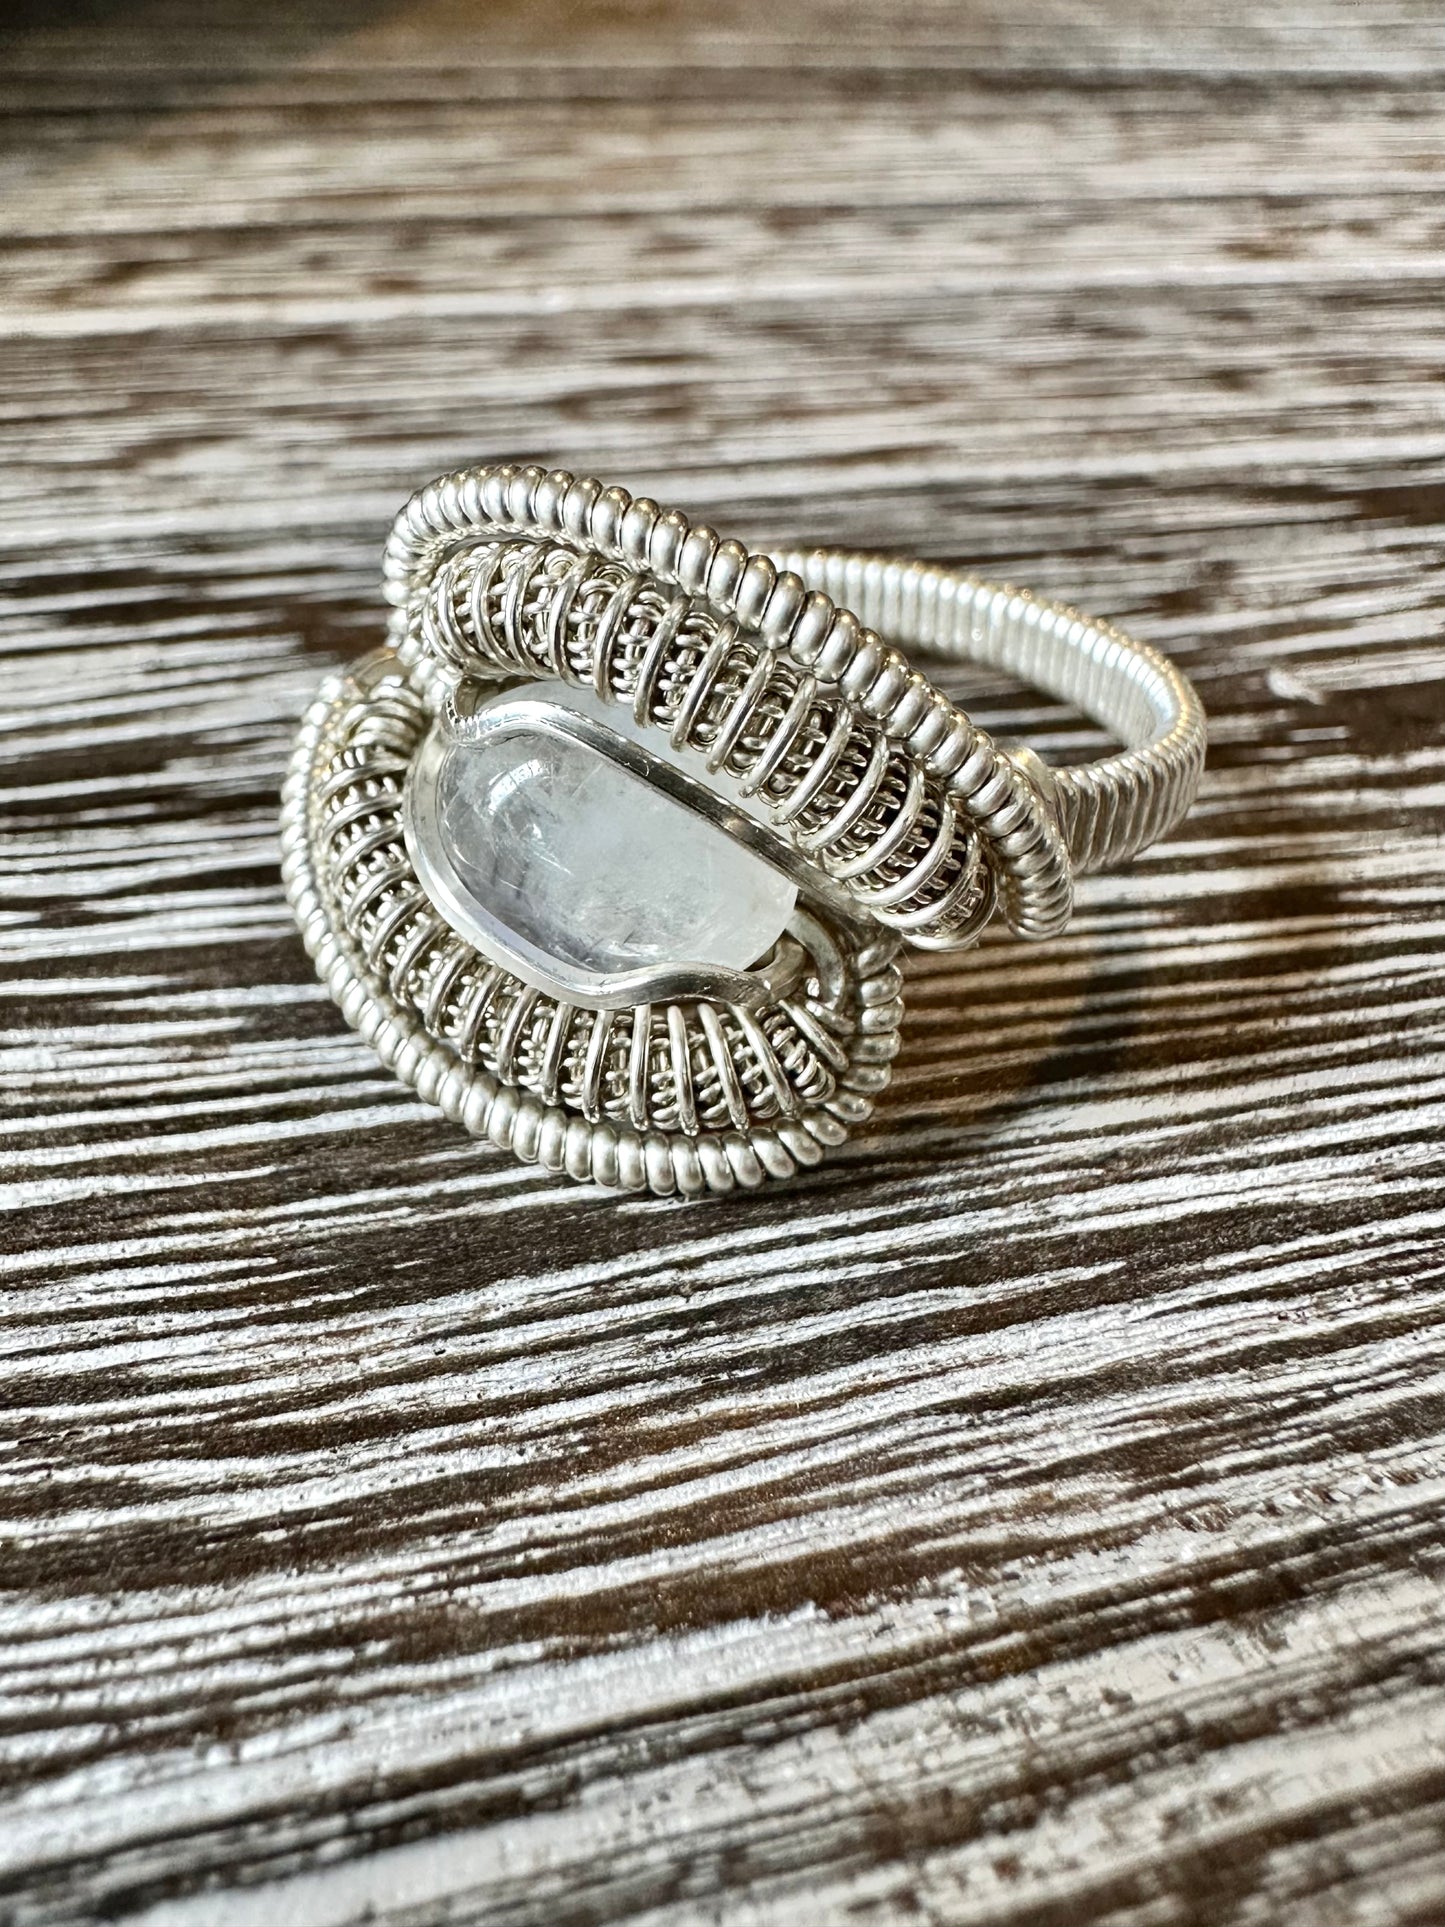 Silver Coiled Moonstone Ring (9.5)